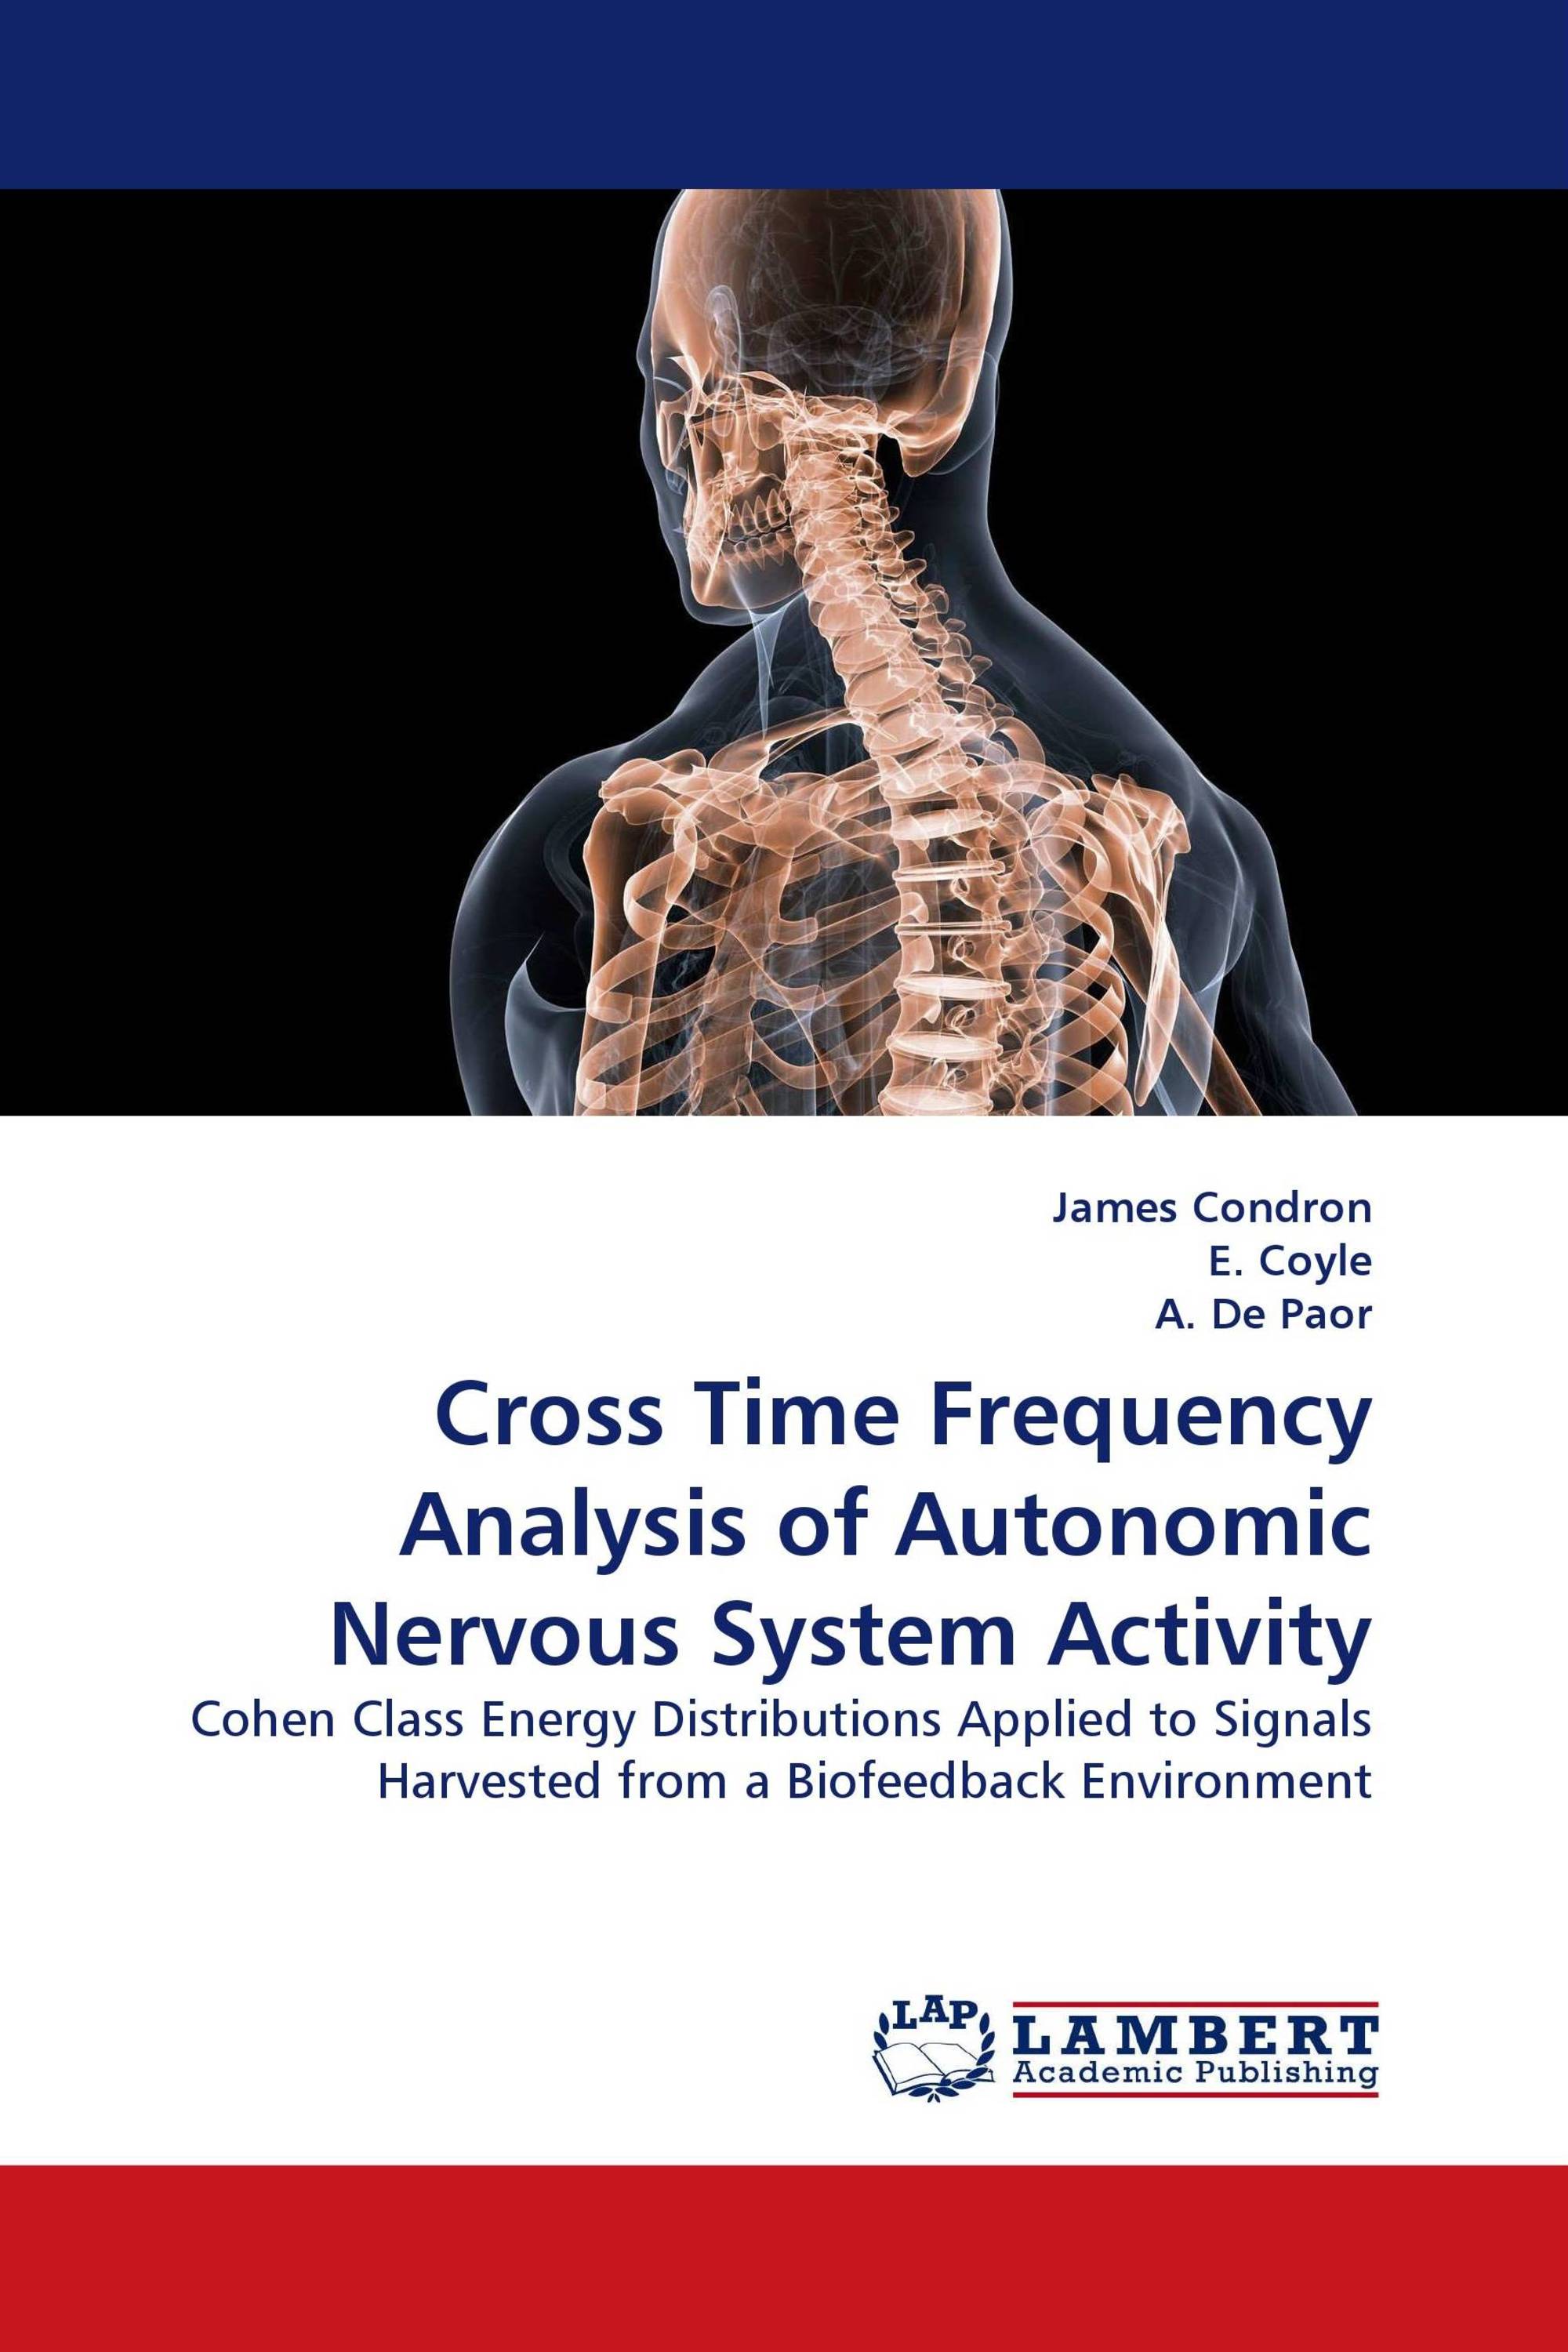 Cross Time Frequency Analysis of Autonomic Nervous System Activity